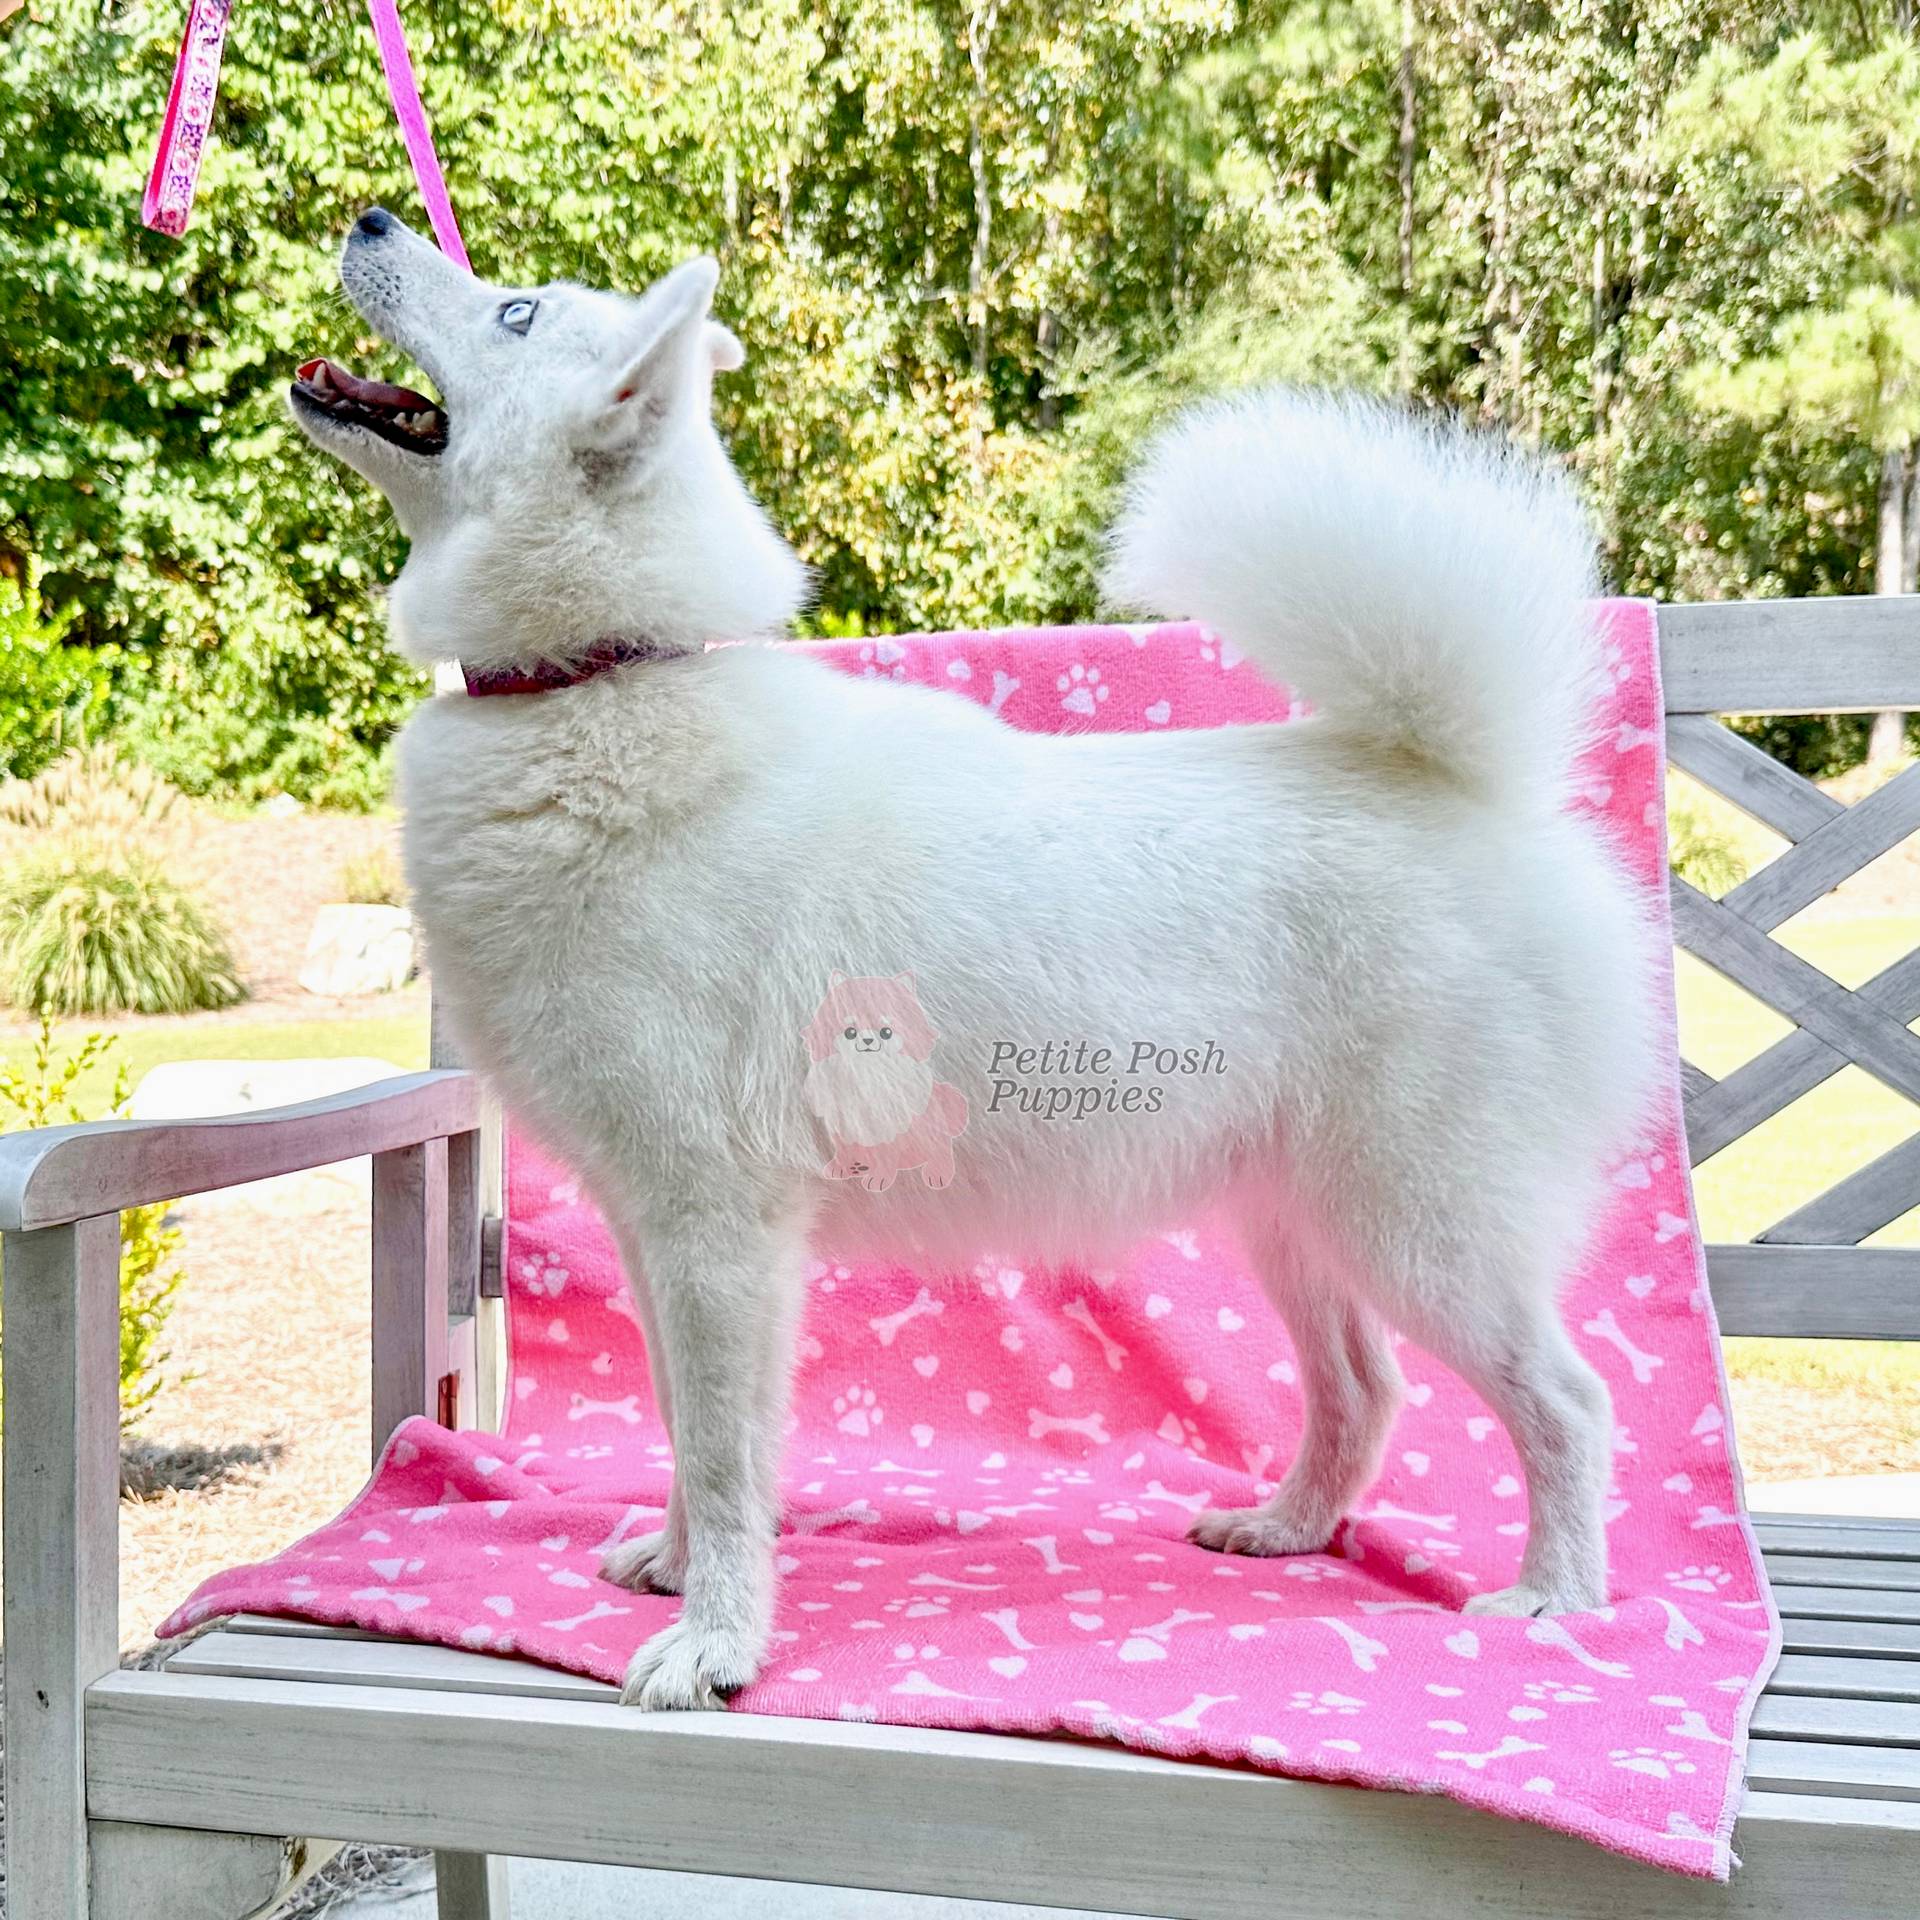 Ocean White Pomsky with stunning crystal blue eyes Petite Posh Puppies